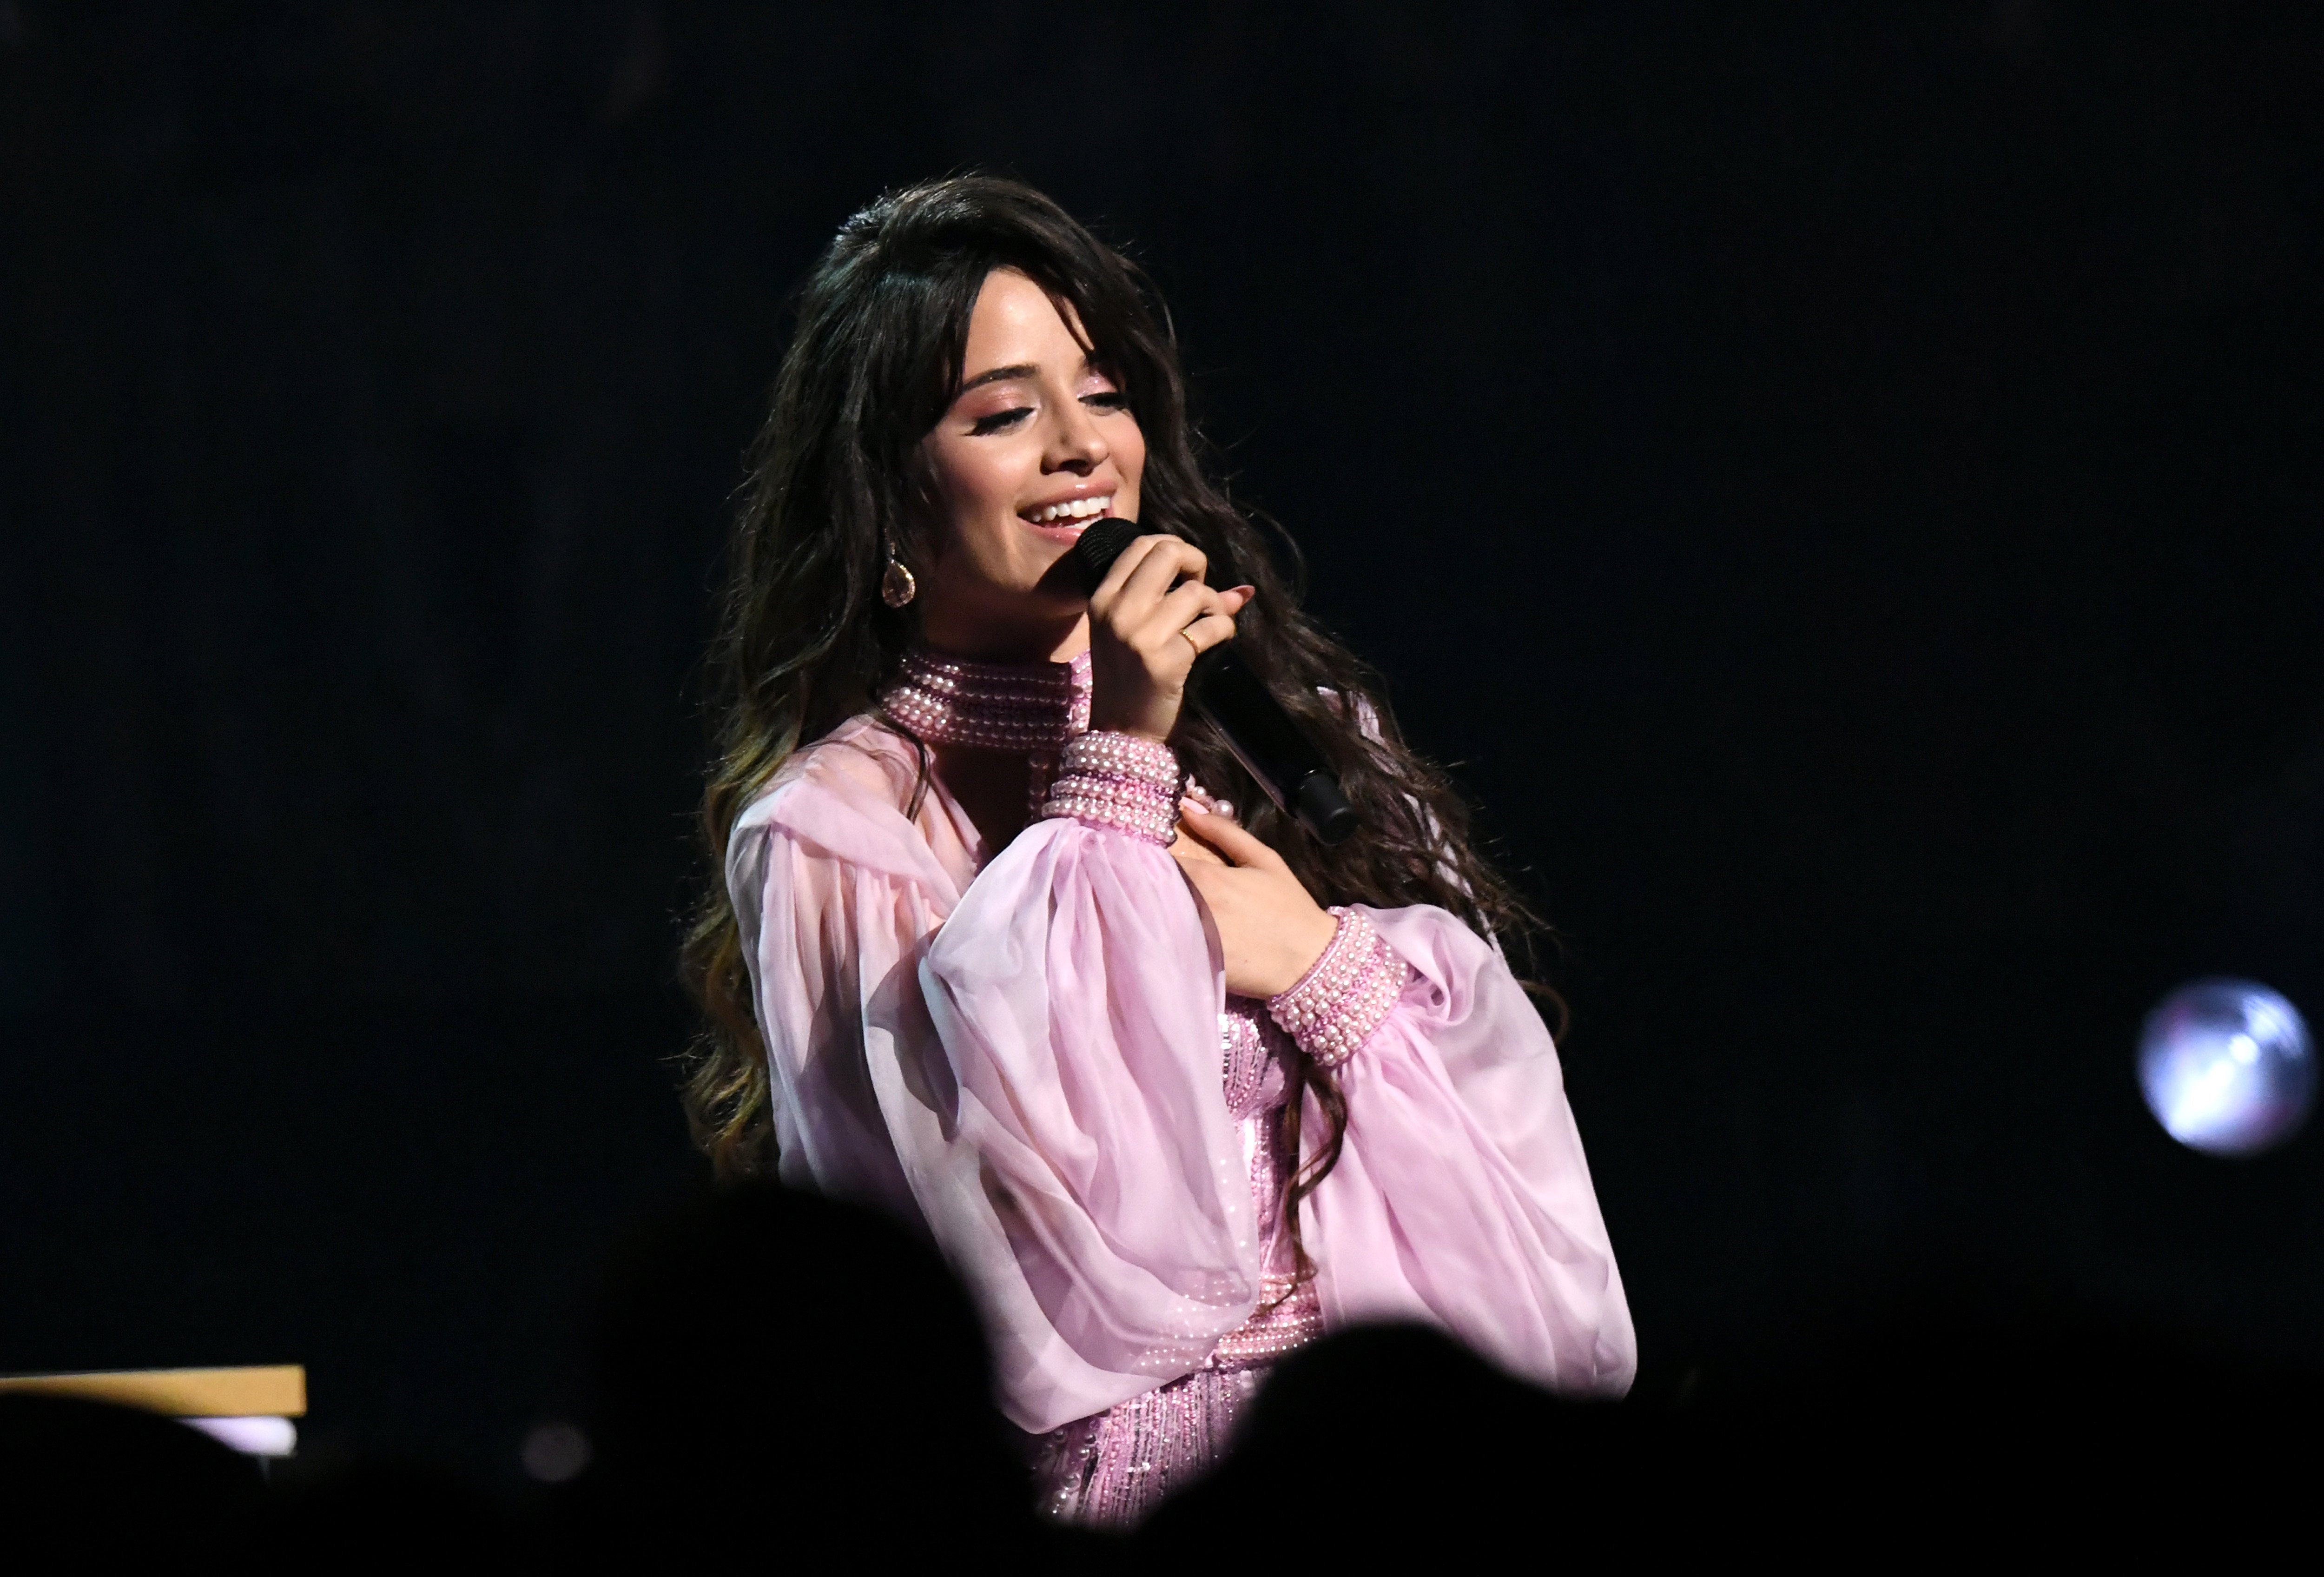 Camila Cabello performs on stage during the 62nd Annual GRAMMY Awards